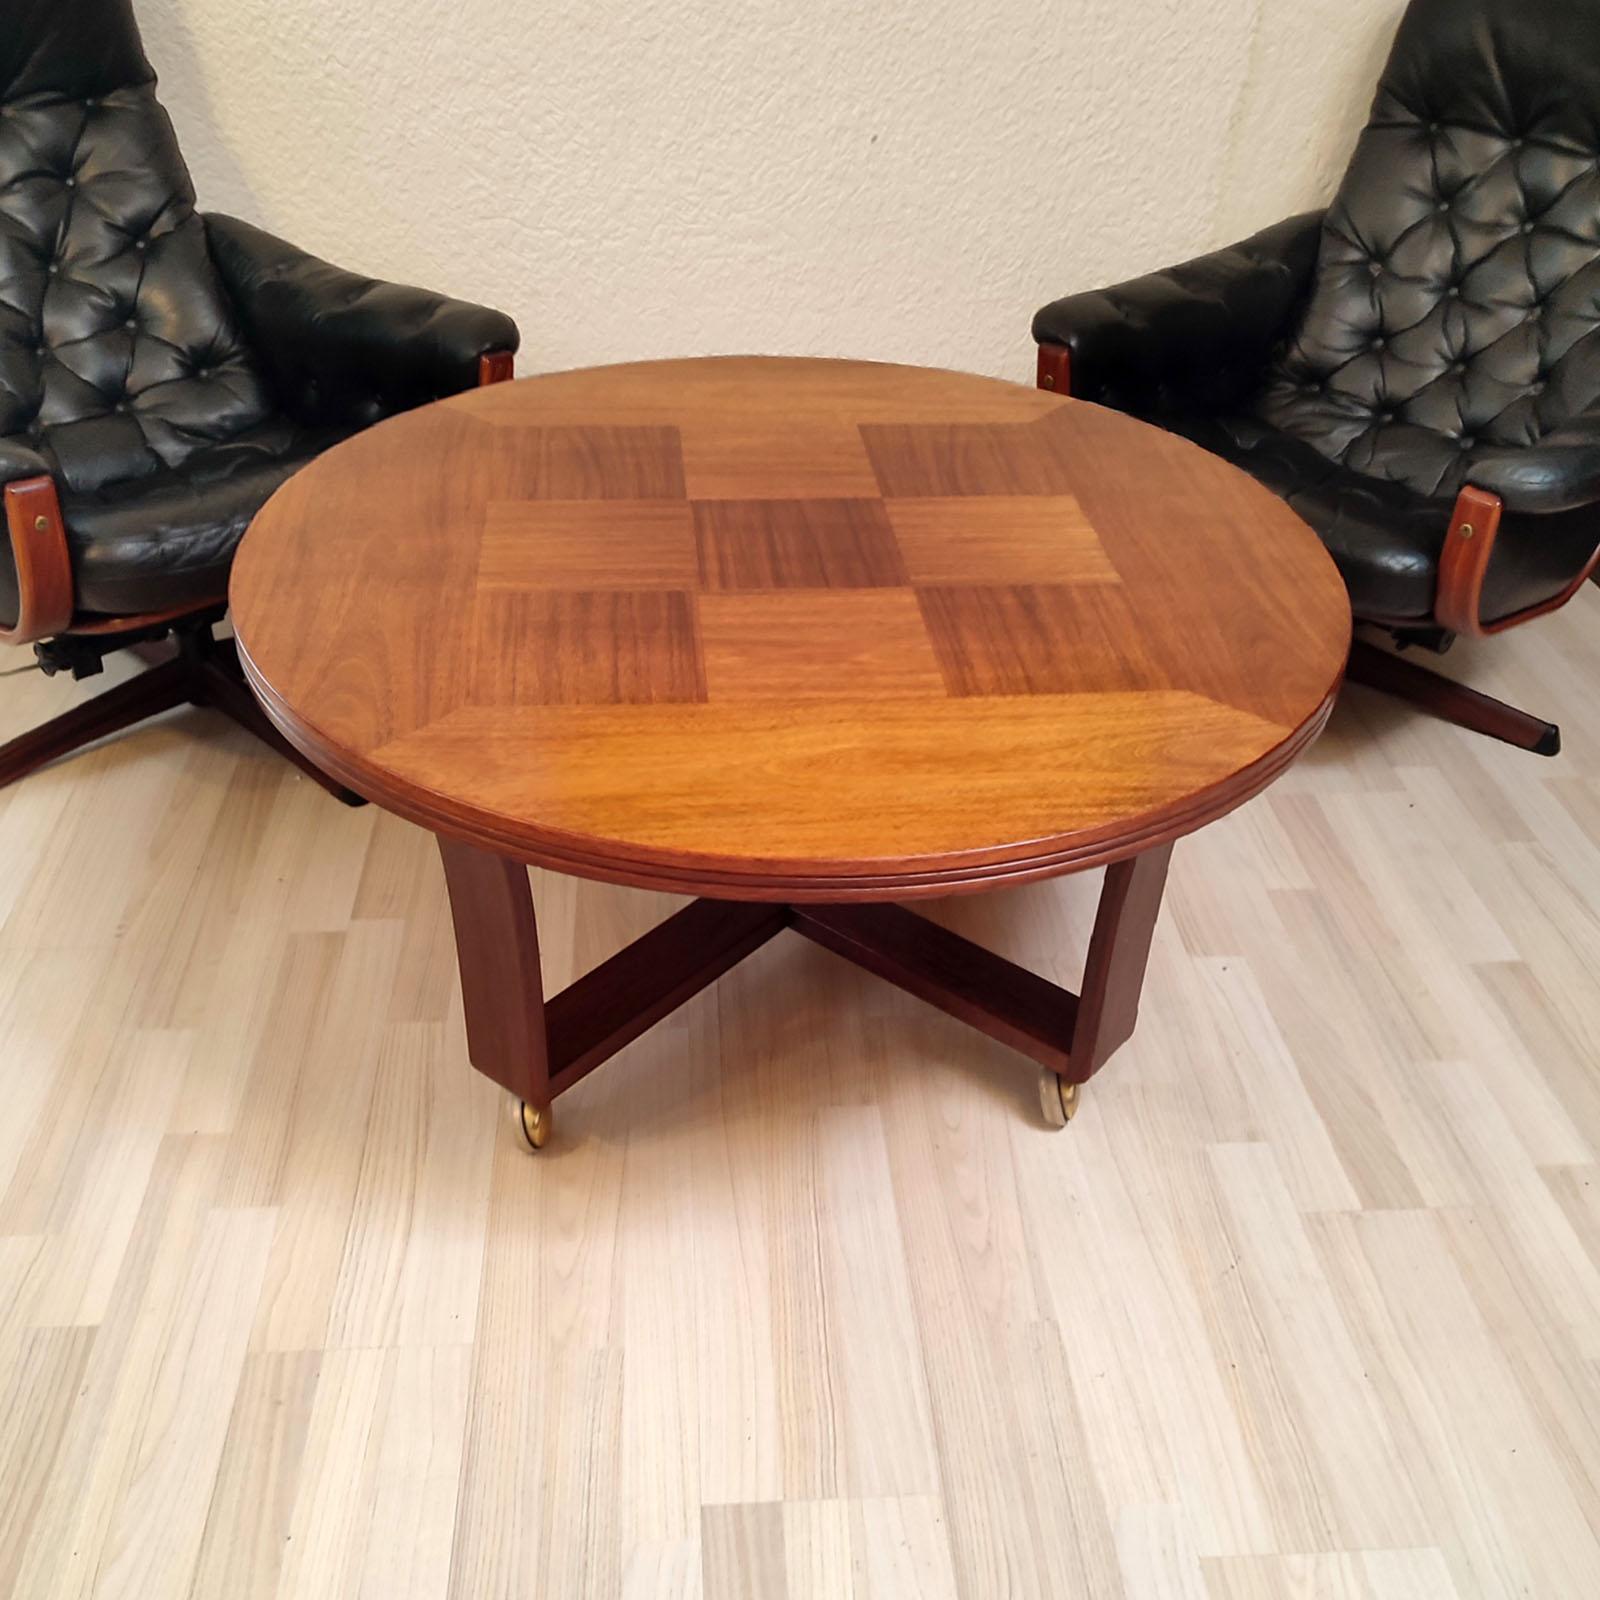 Swedish Mid-Century Modern Round Coffee Sofa Table on Castors, Sweden 1970s For Sale